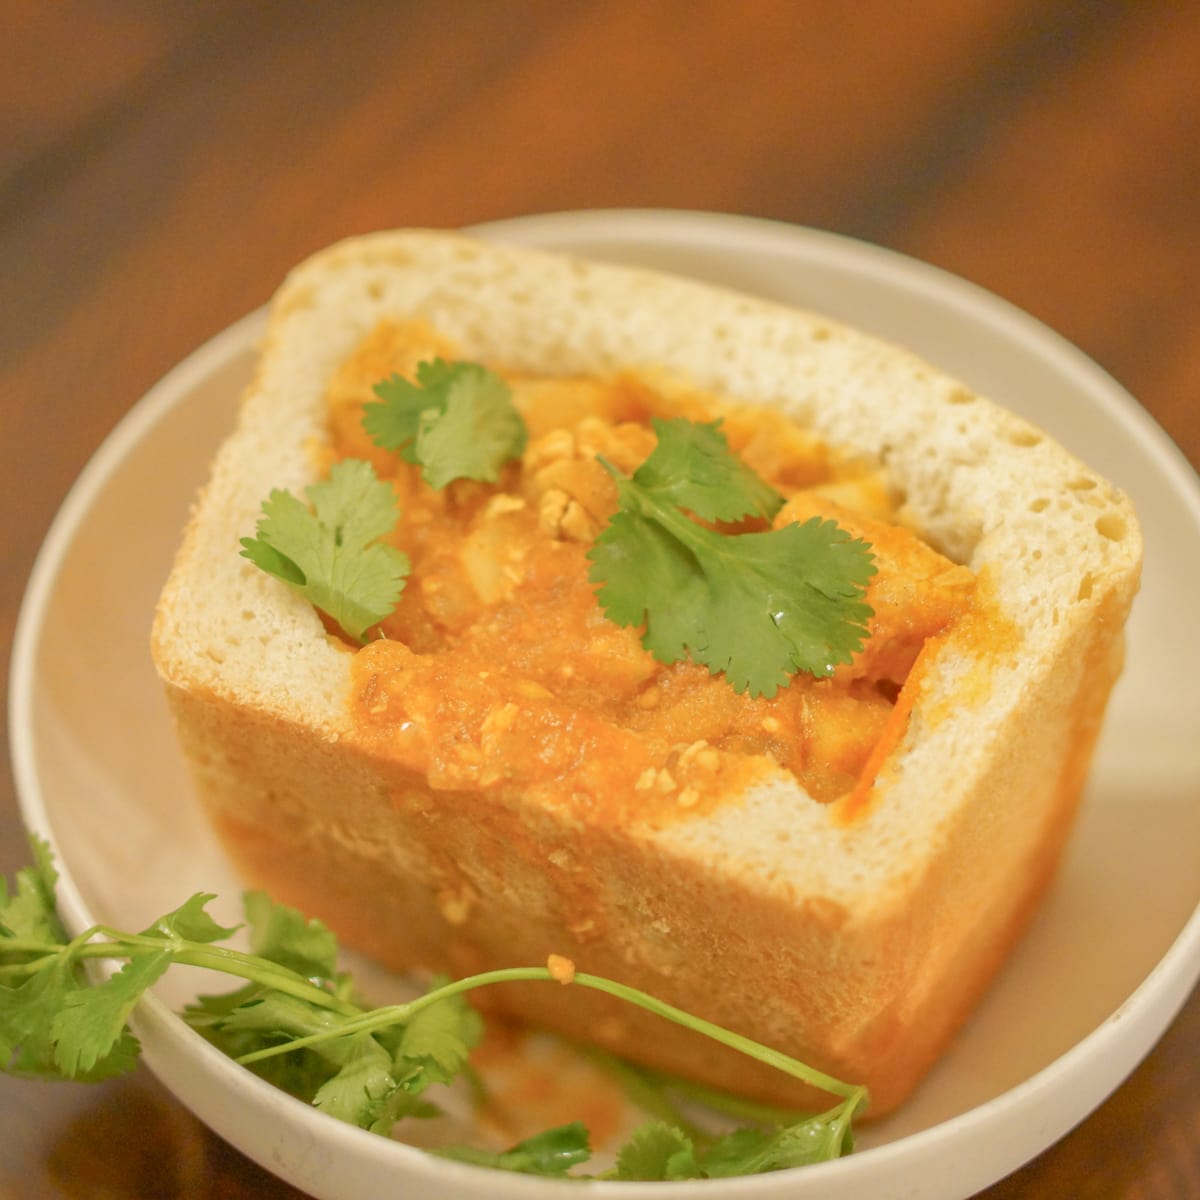 Bread filled with Durban style chicken curry.